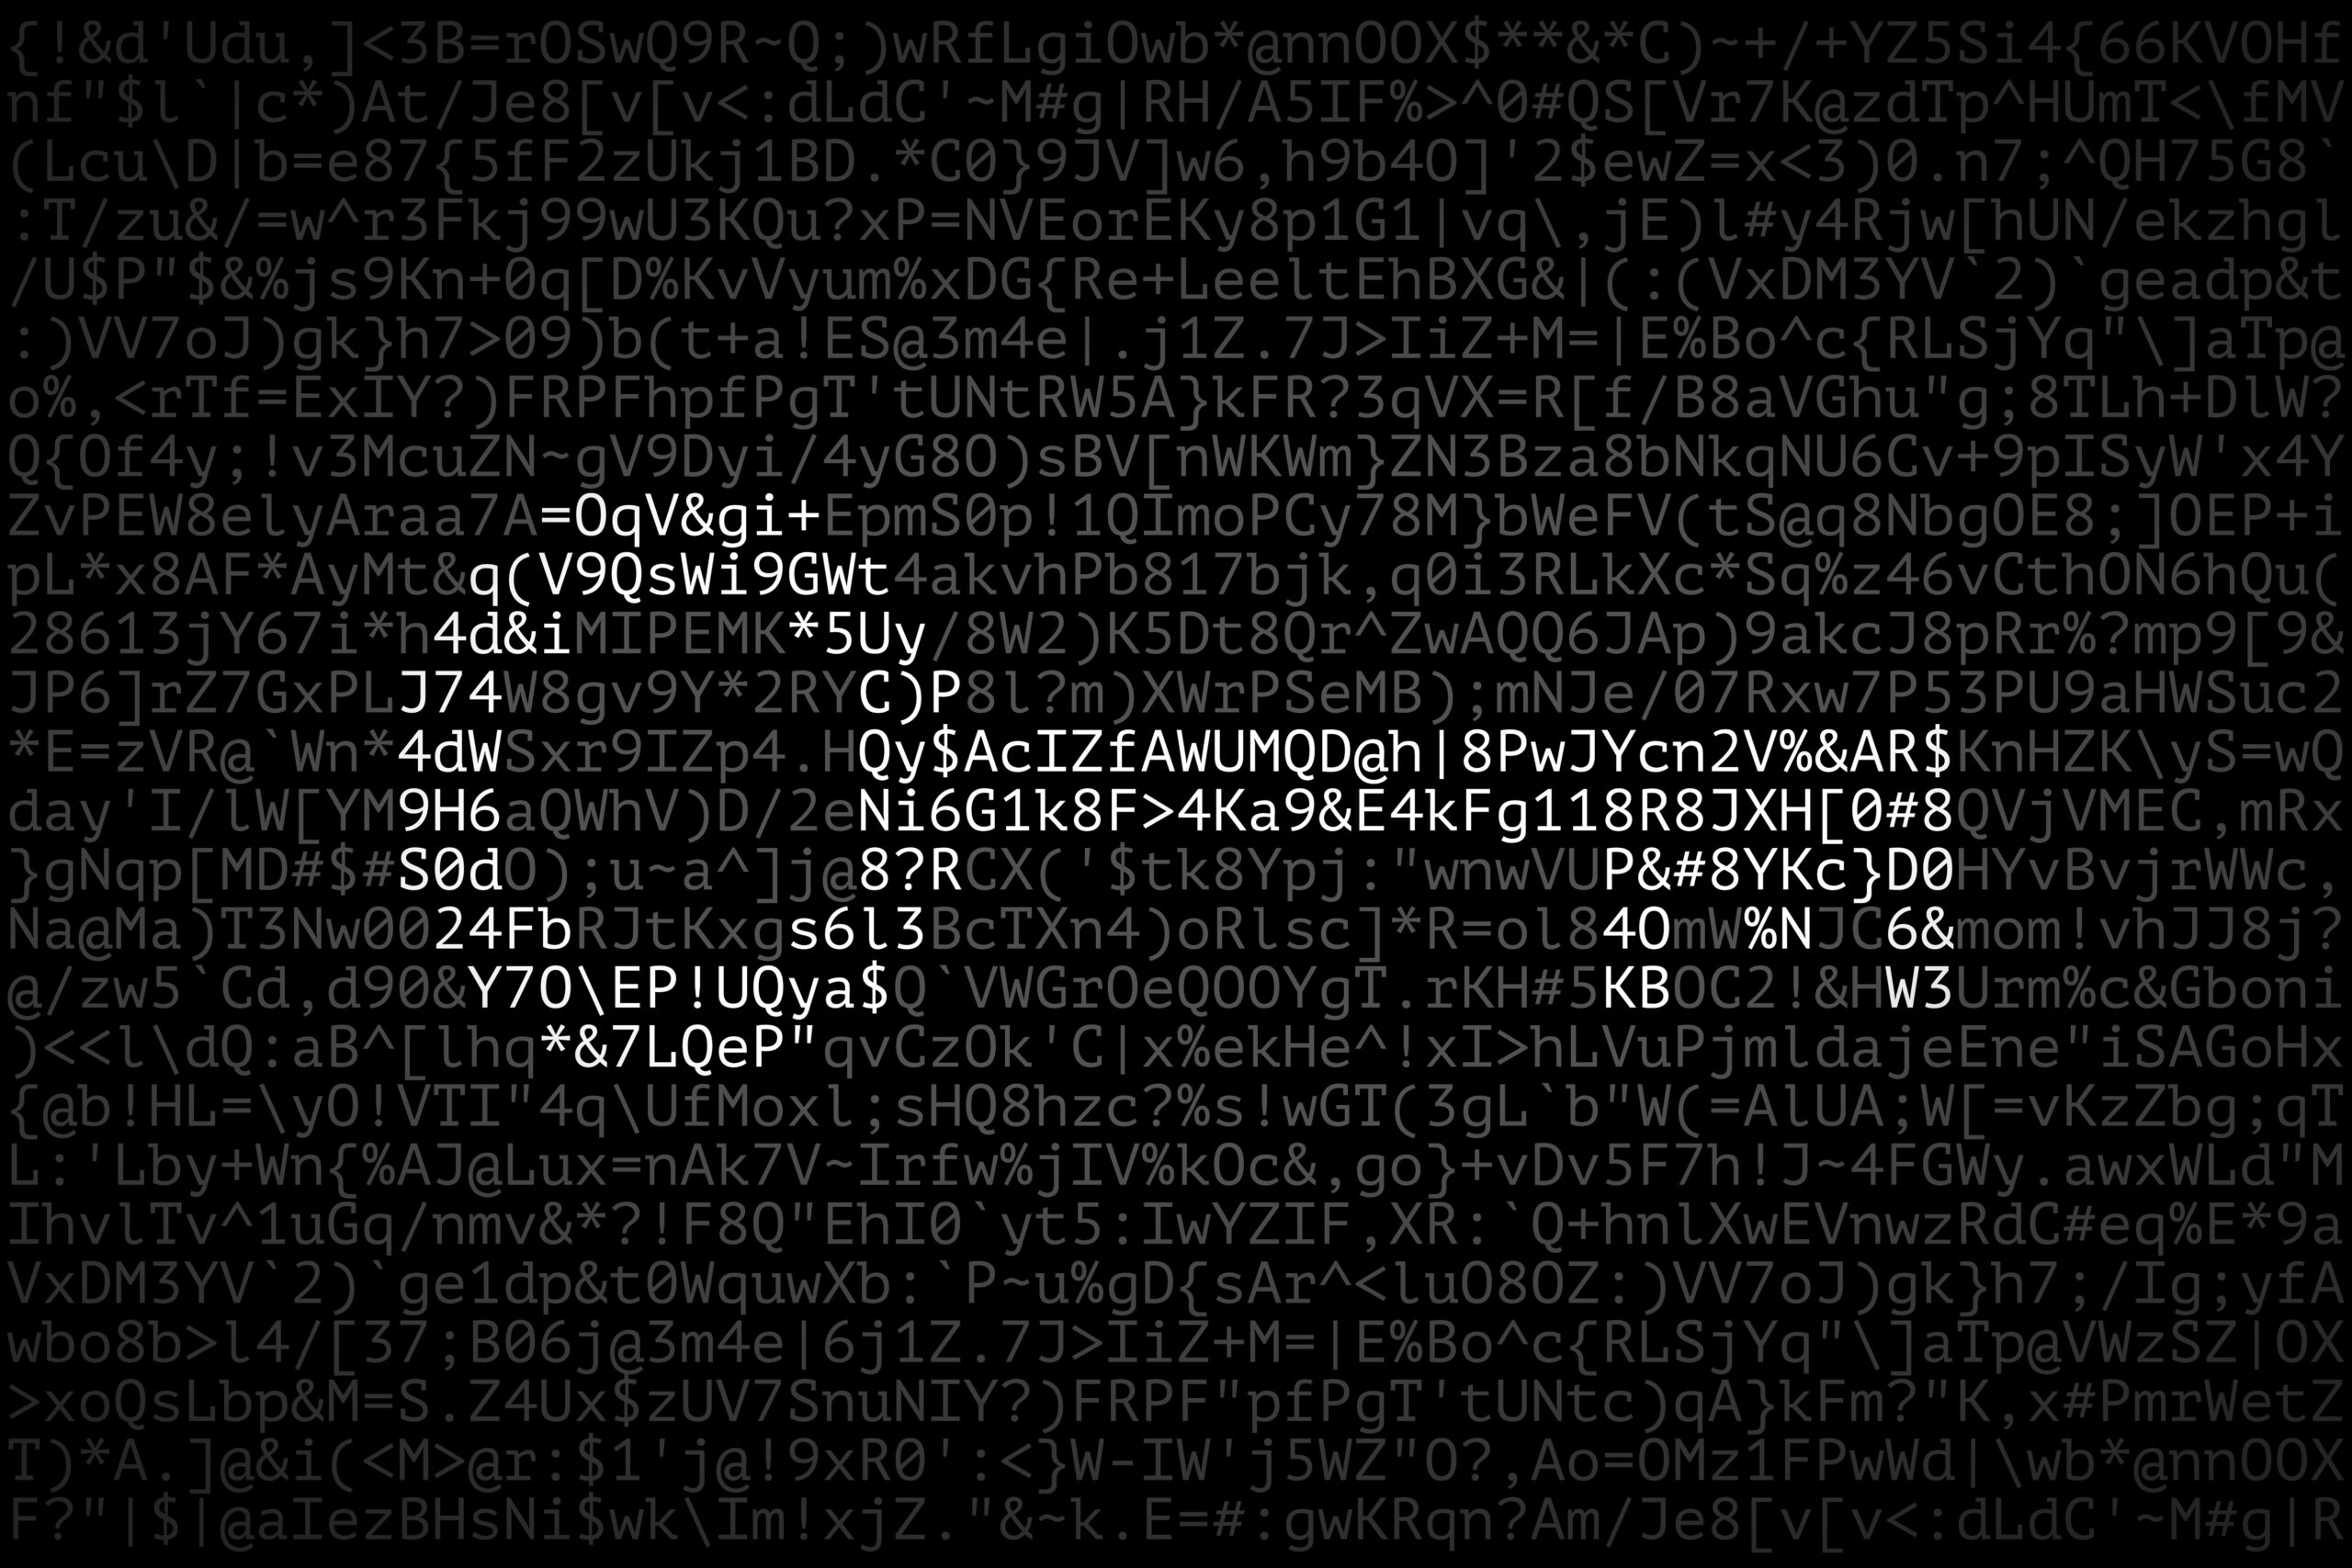 graphic image of randomized code that shows the pattern of a key in the code